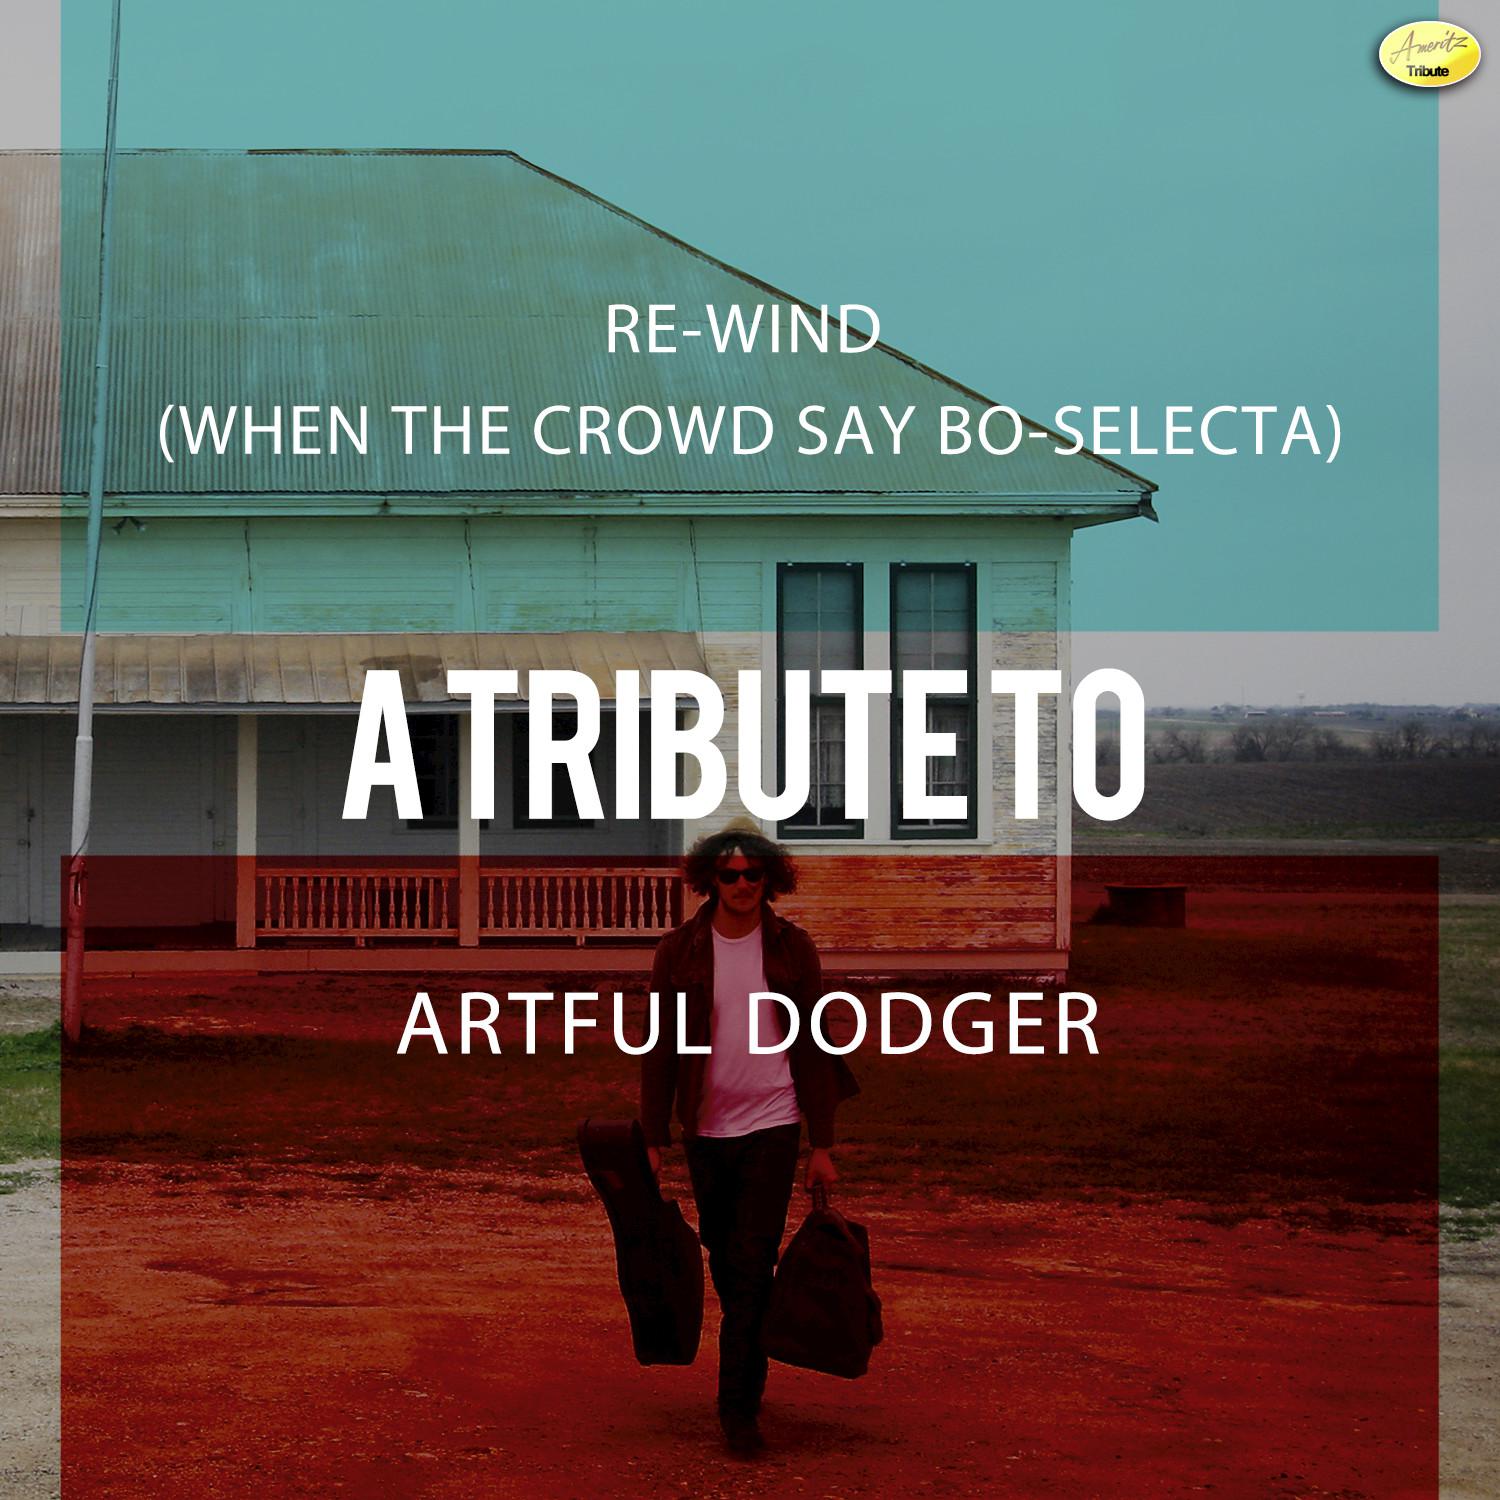 Re-Wind (When the Crowd Say Bo-Selecta) - A Tribute to Artful Dodger - Single